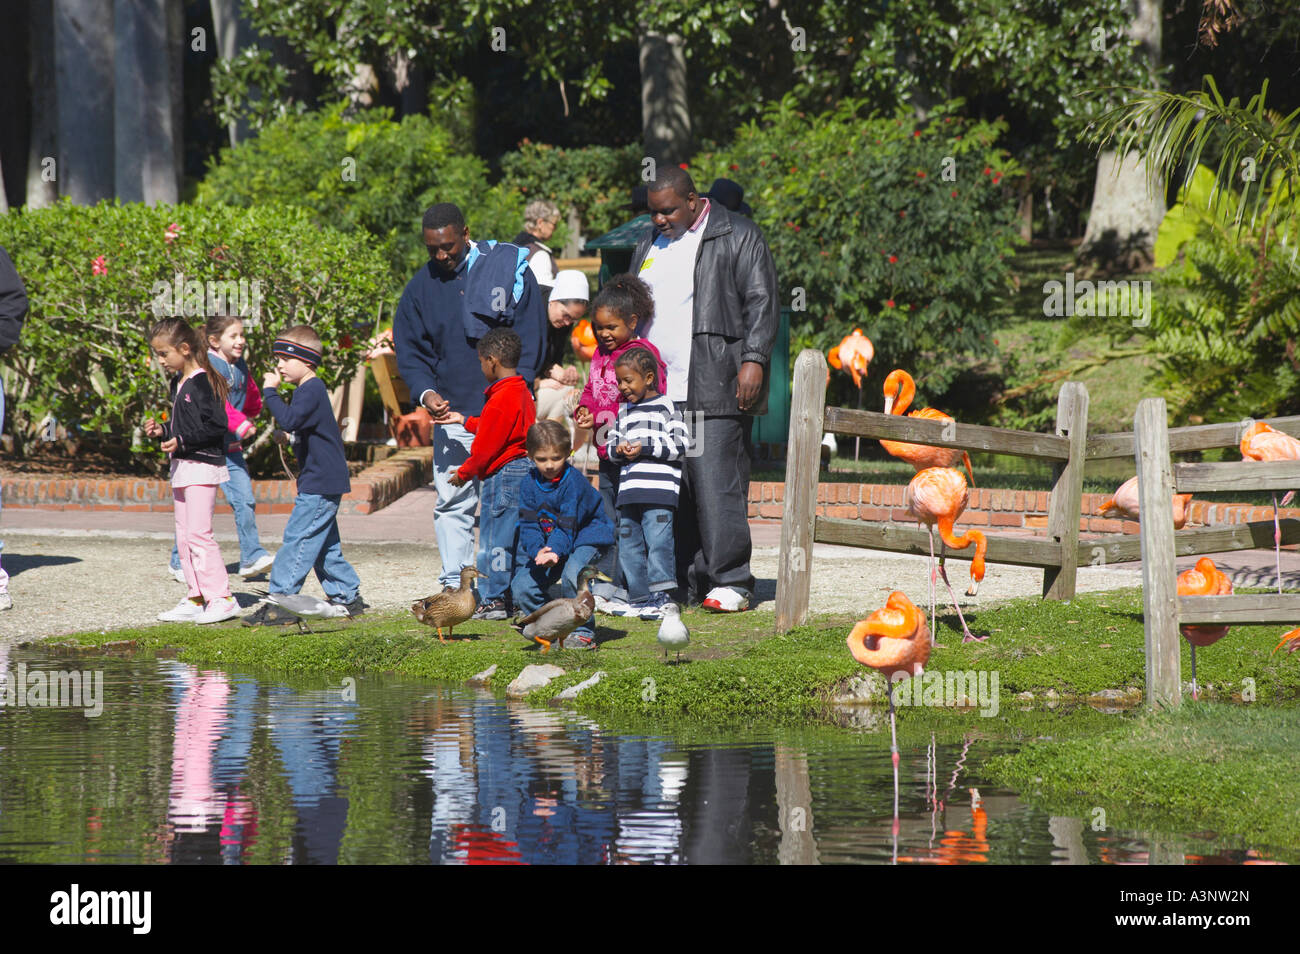 Kids Viewing The Flamingos In The Flamingo Lagoon Area Of The